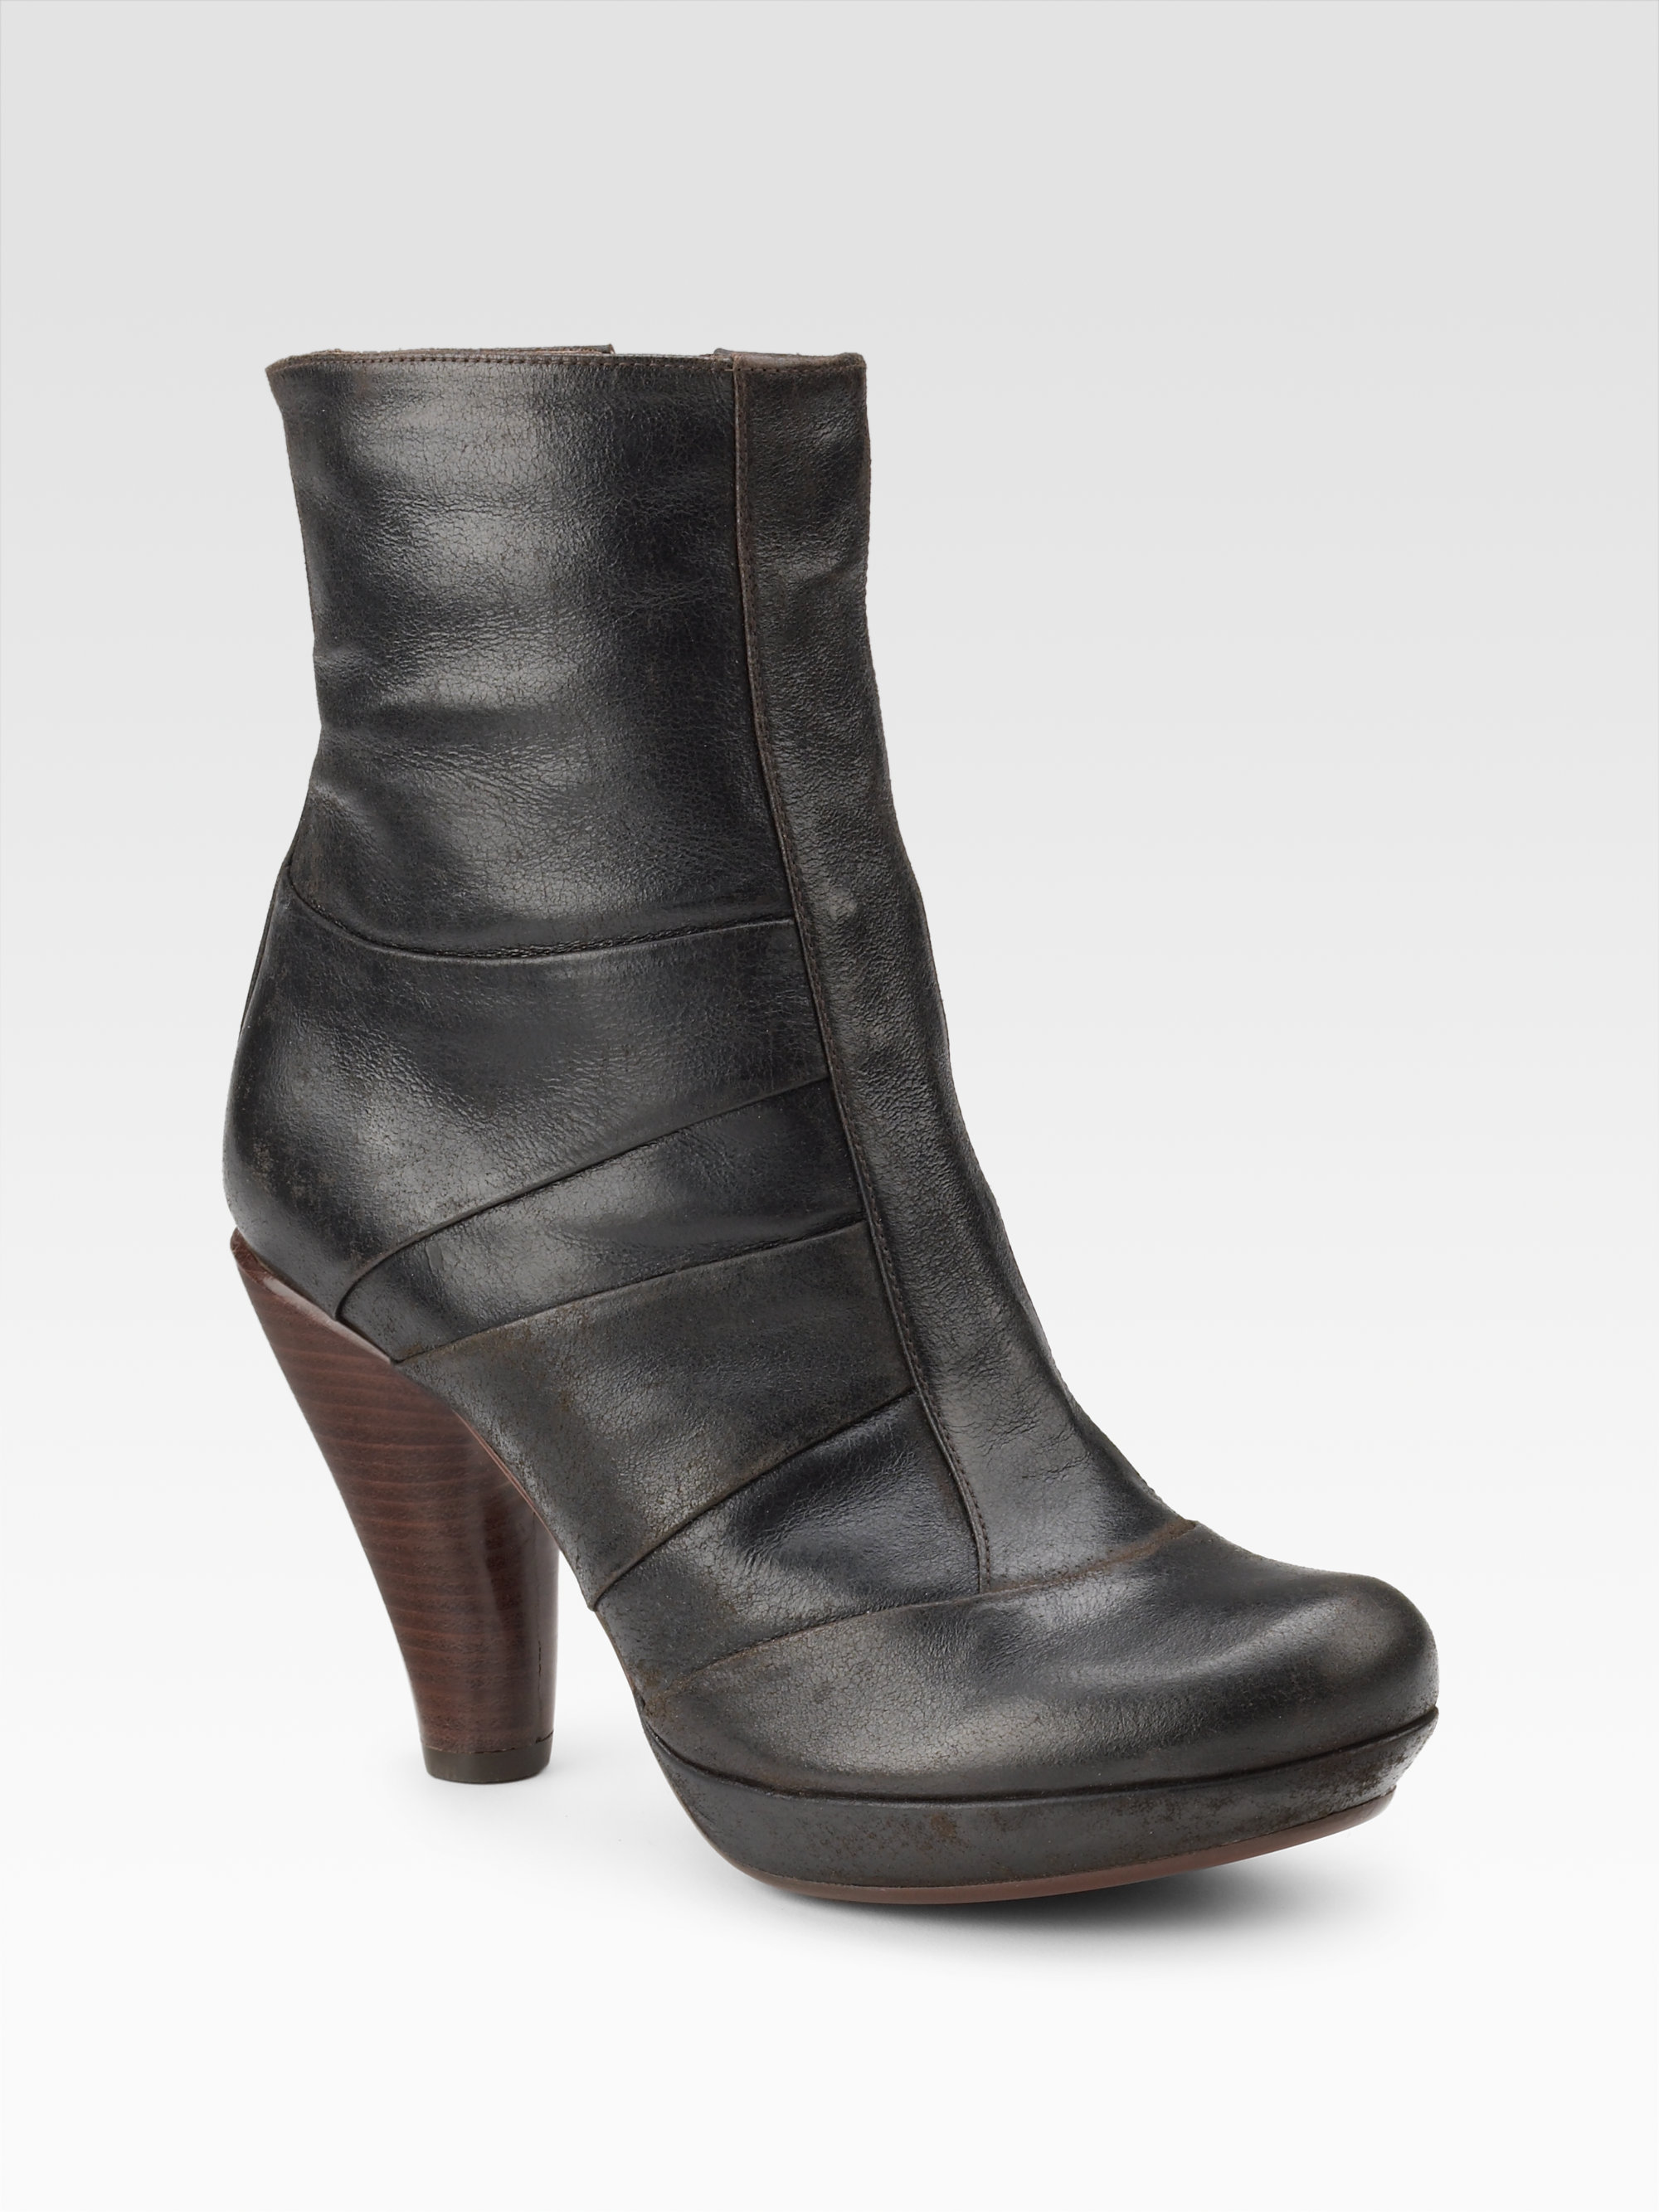 Chie Mihara Stacked Heel Ankle Boots in Brown (dark brown) | Lyst